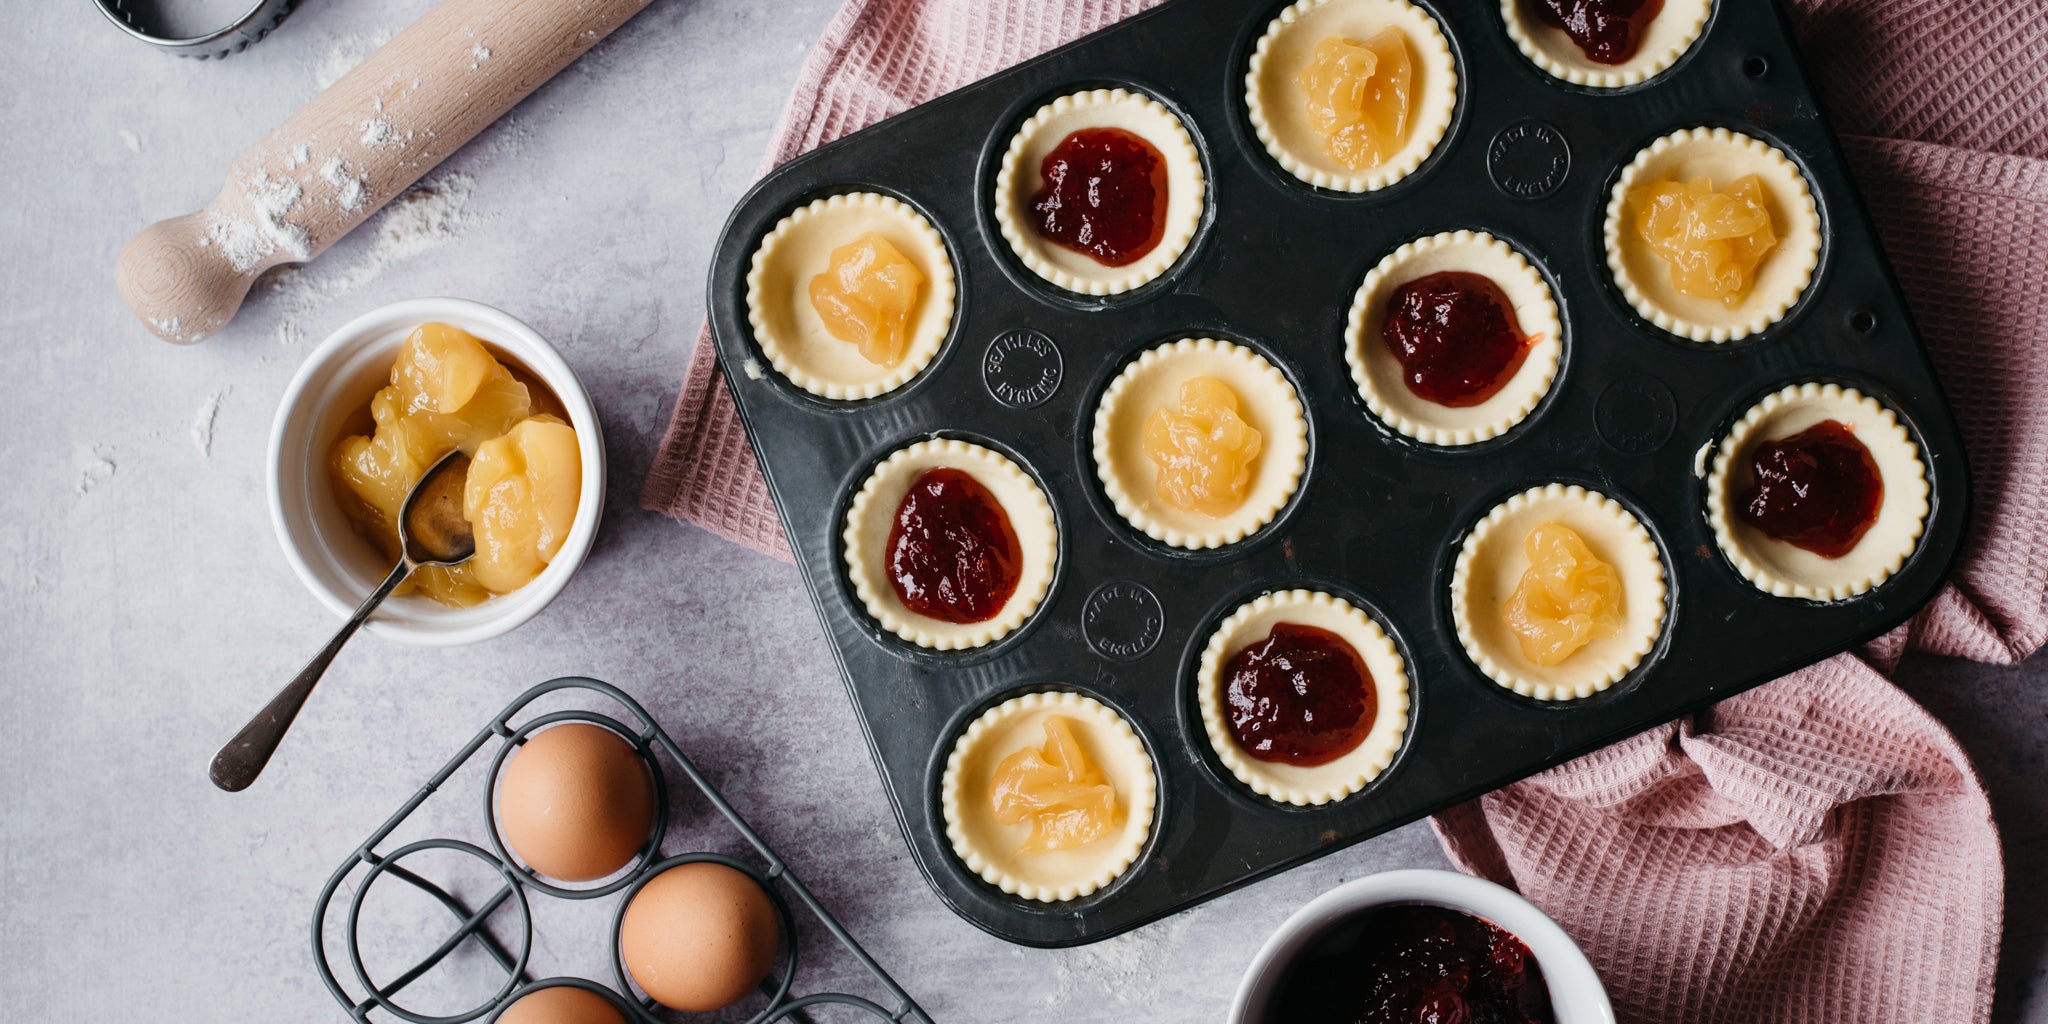 Strawberry & Apricot Jam Tarts in a baking tray being filled with jam ready to bake